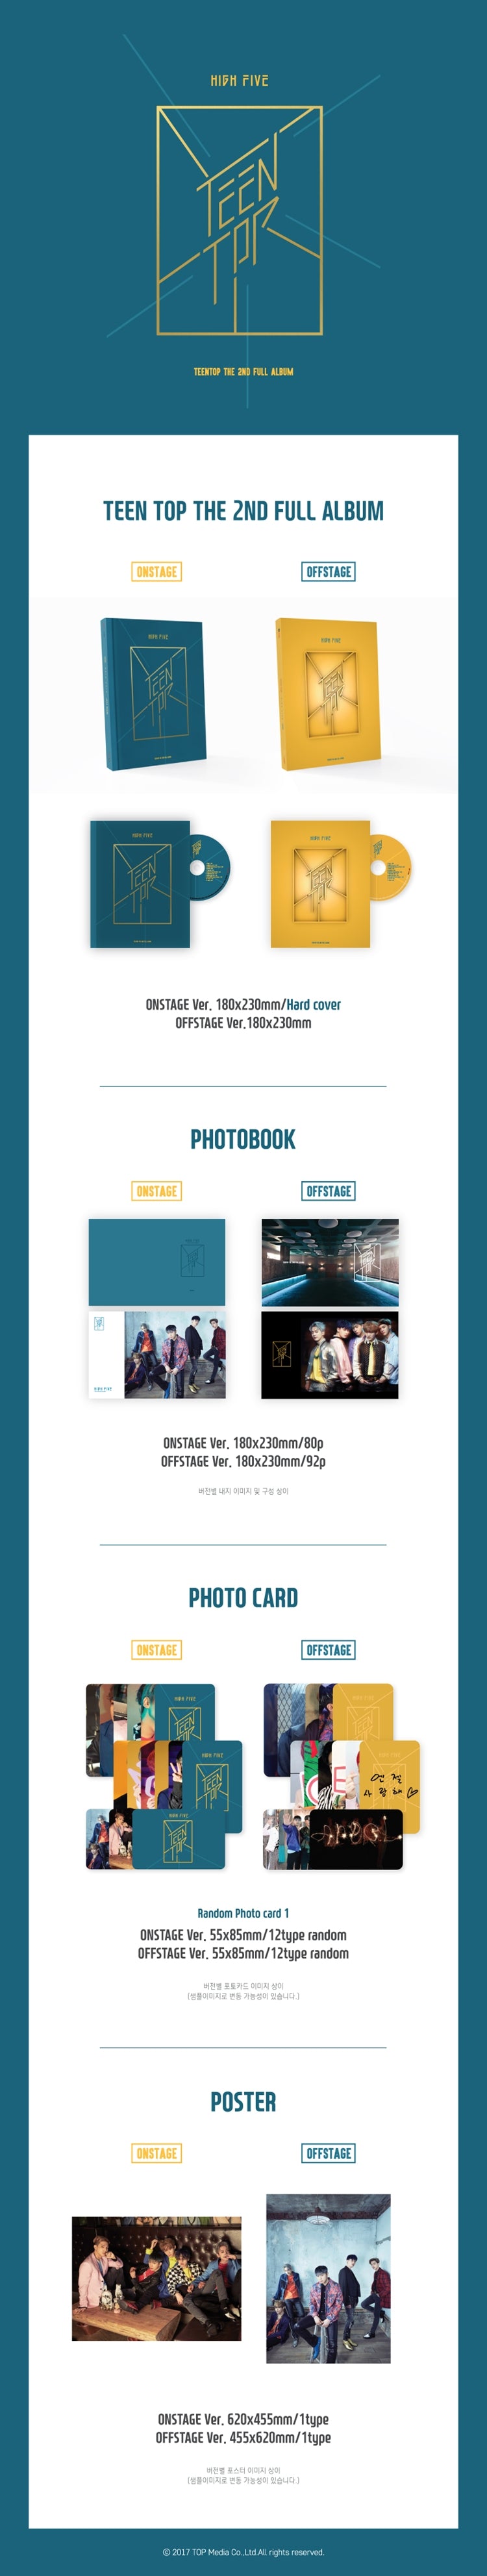 1 CD
1 Photo Book (92 pages)
1 Photo Card